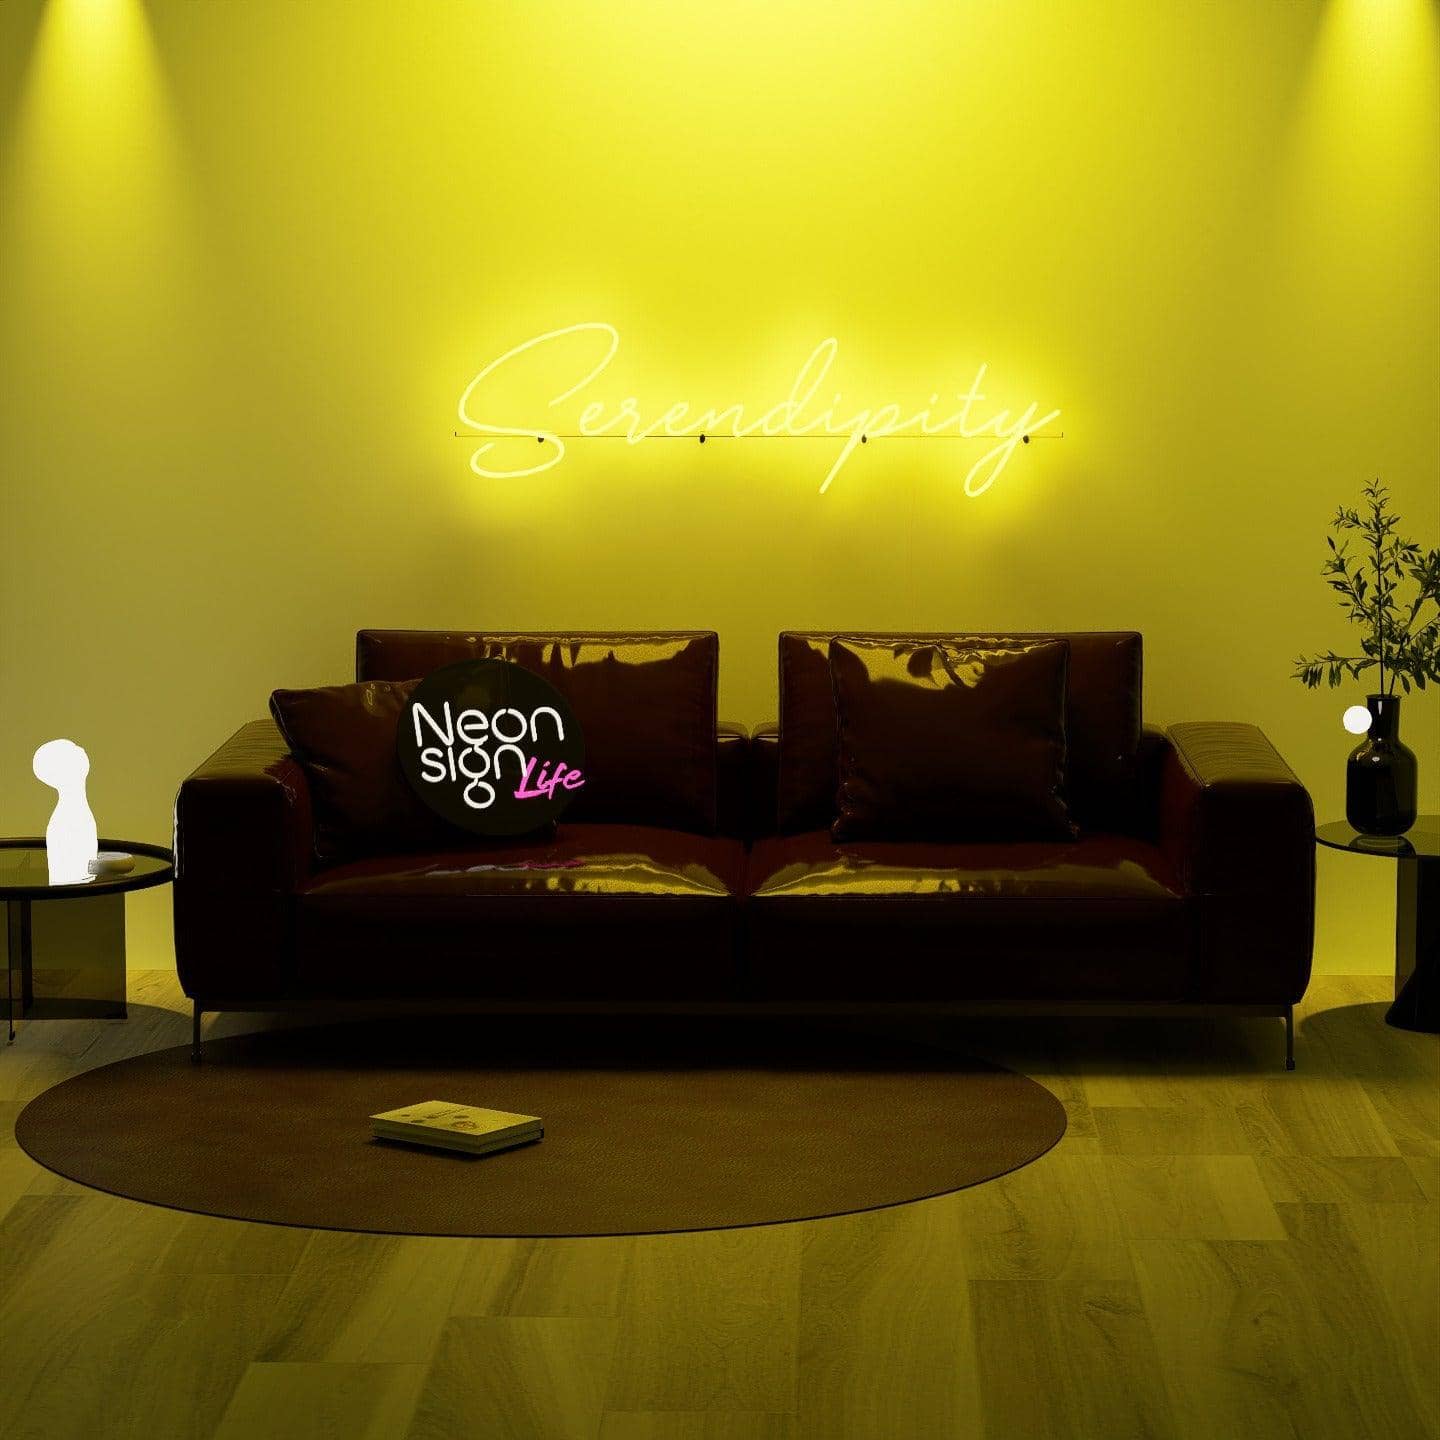 golden-neon-lights-illuminated-in-the-dark-and-hung-on-the-wall-for-display-srendipity